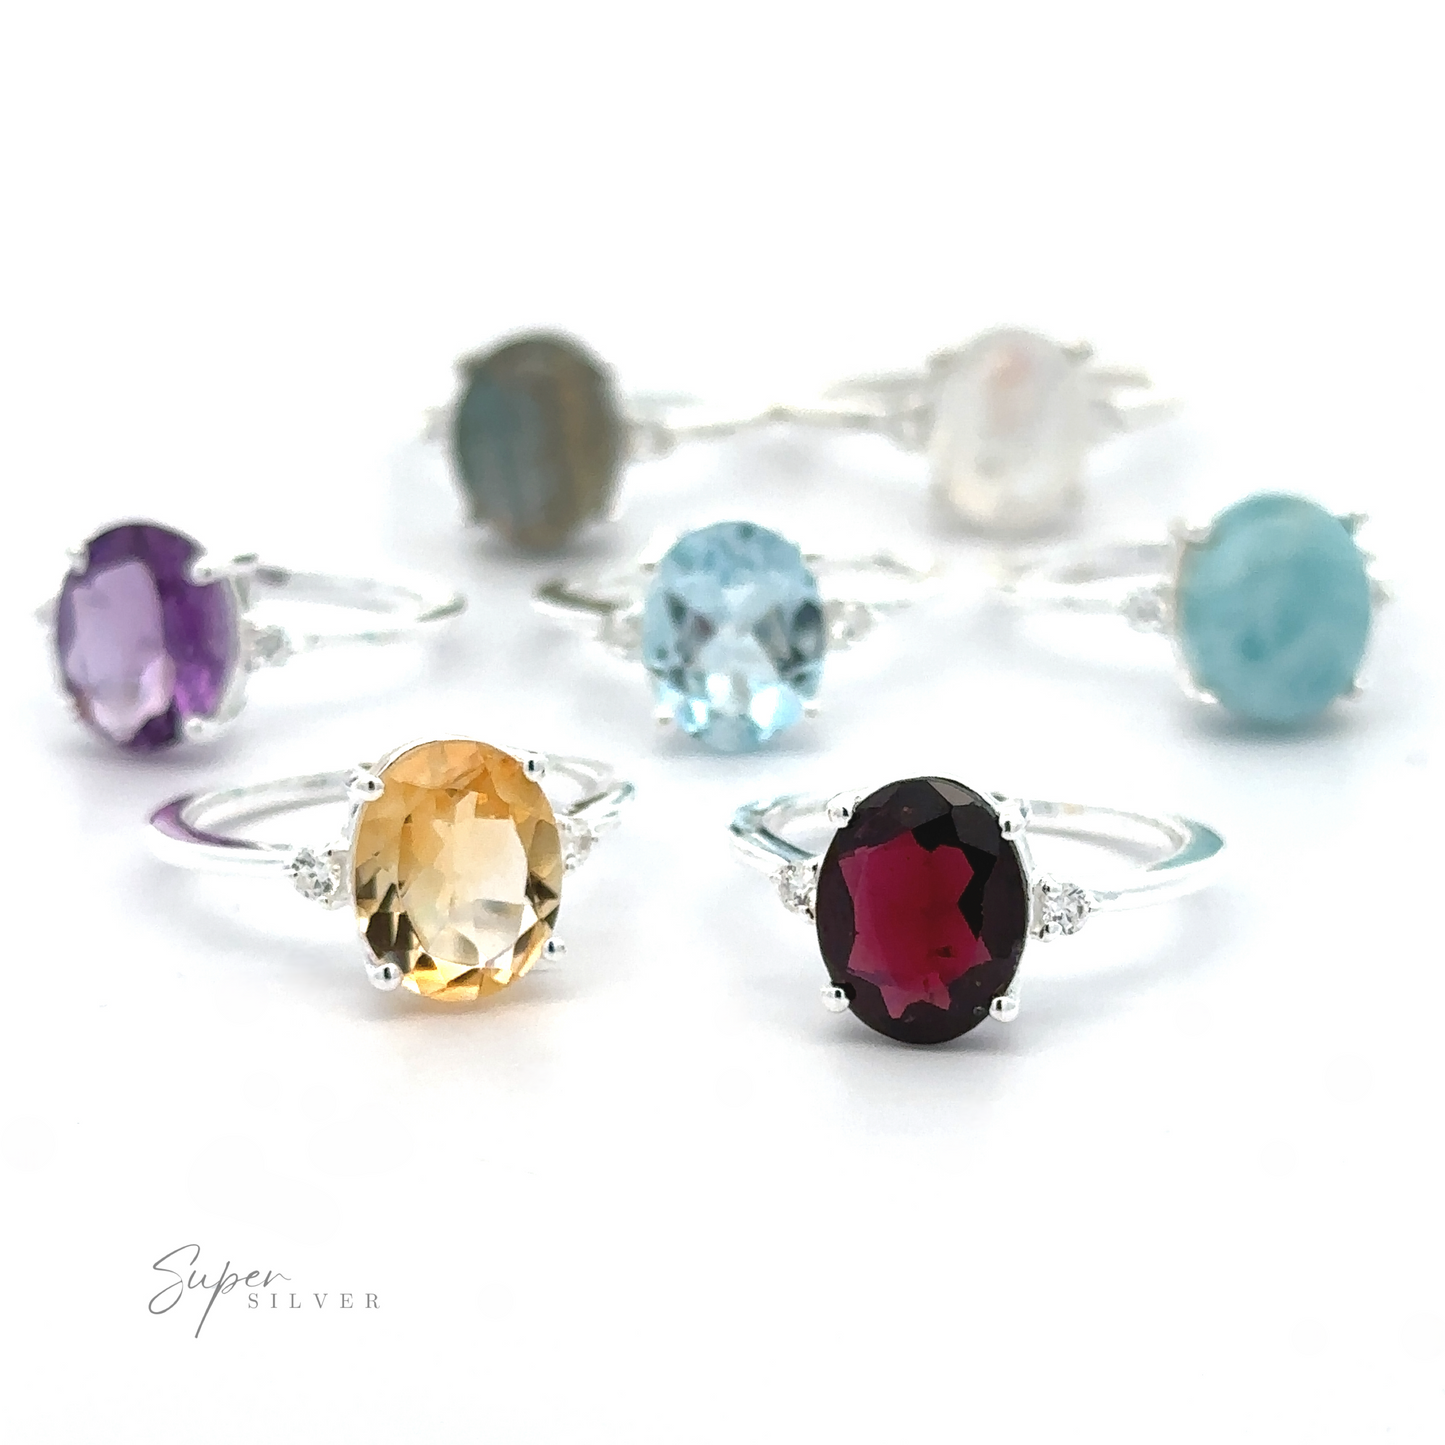 A collection of Brilliant Pronged Oval Gemstone Rings with .925 sterling silver bands displayed against a white background.